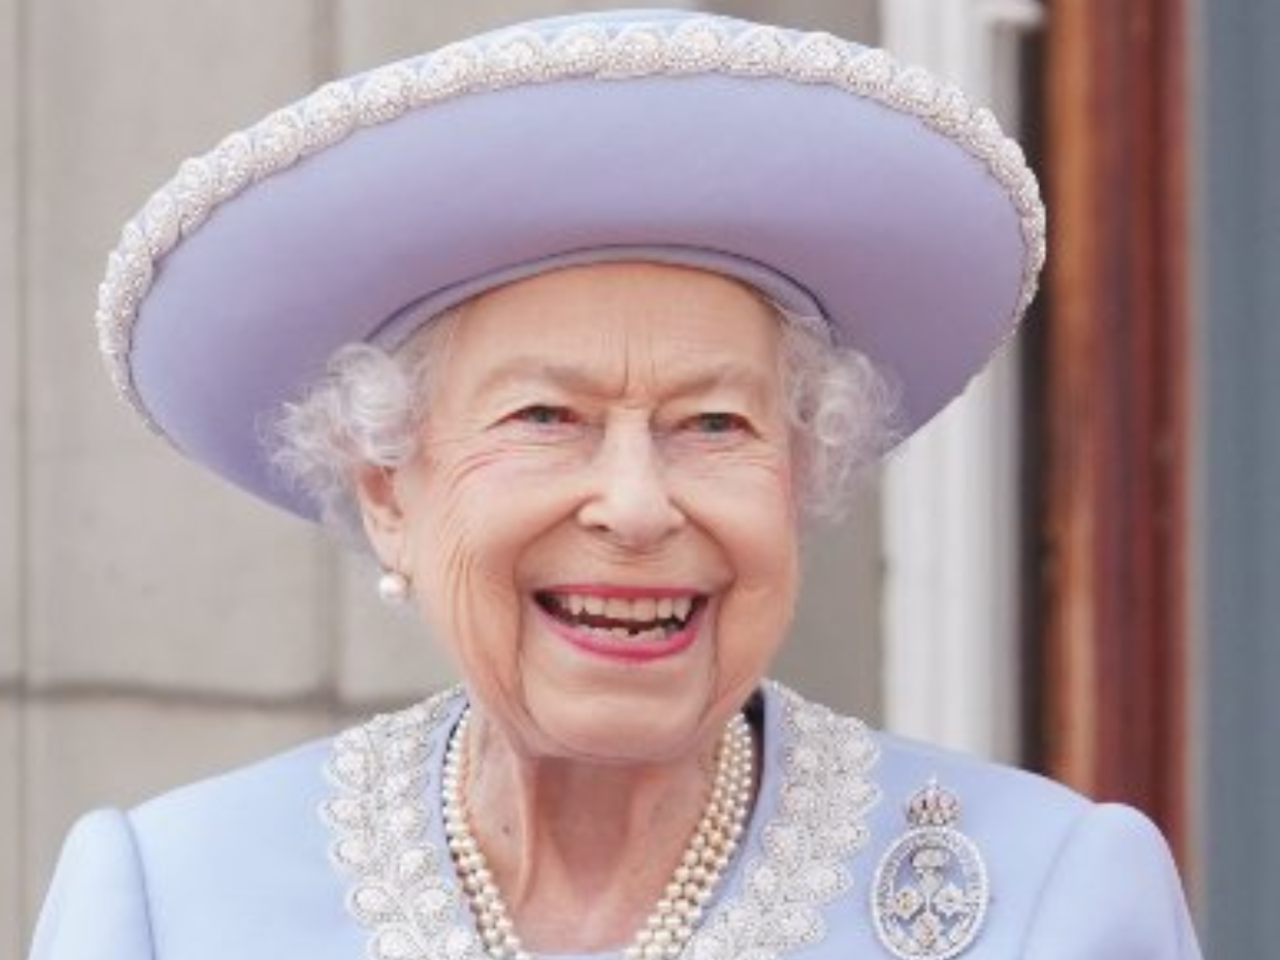 The internet documents a British monarch's death — for the first